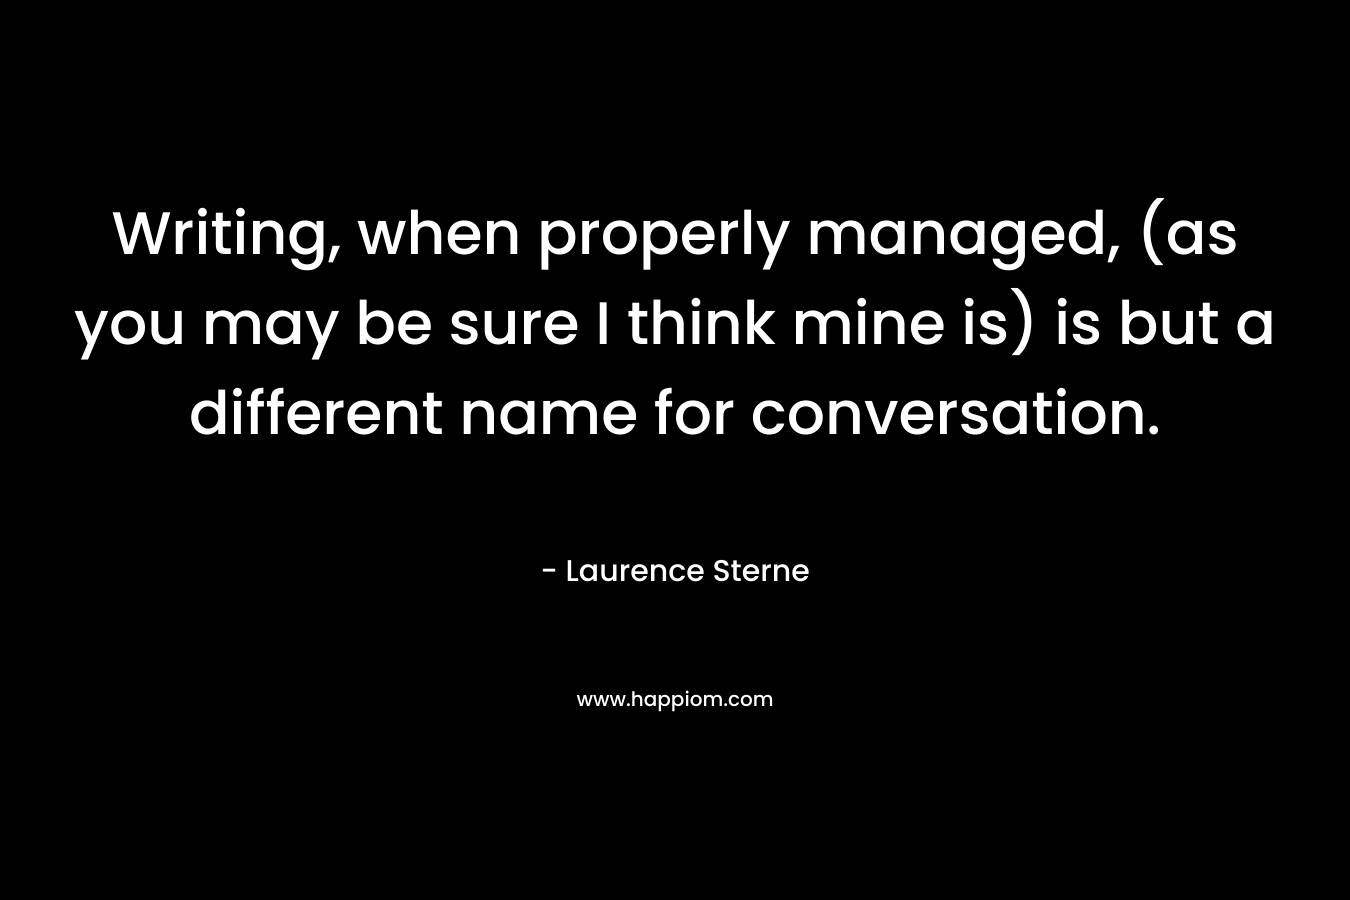 Writing, when properly managed, (as you may be sure I think mine is) is but a different name for conversation. – Laurence Sterne